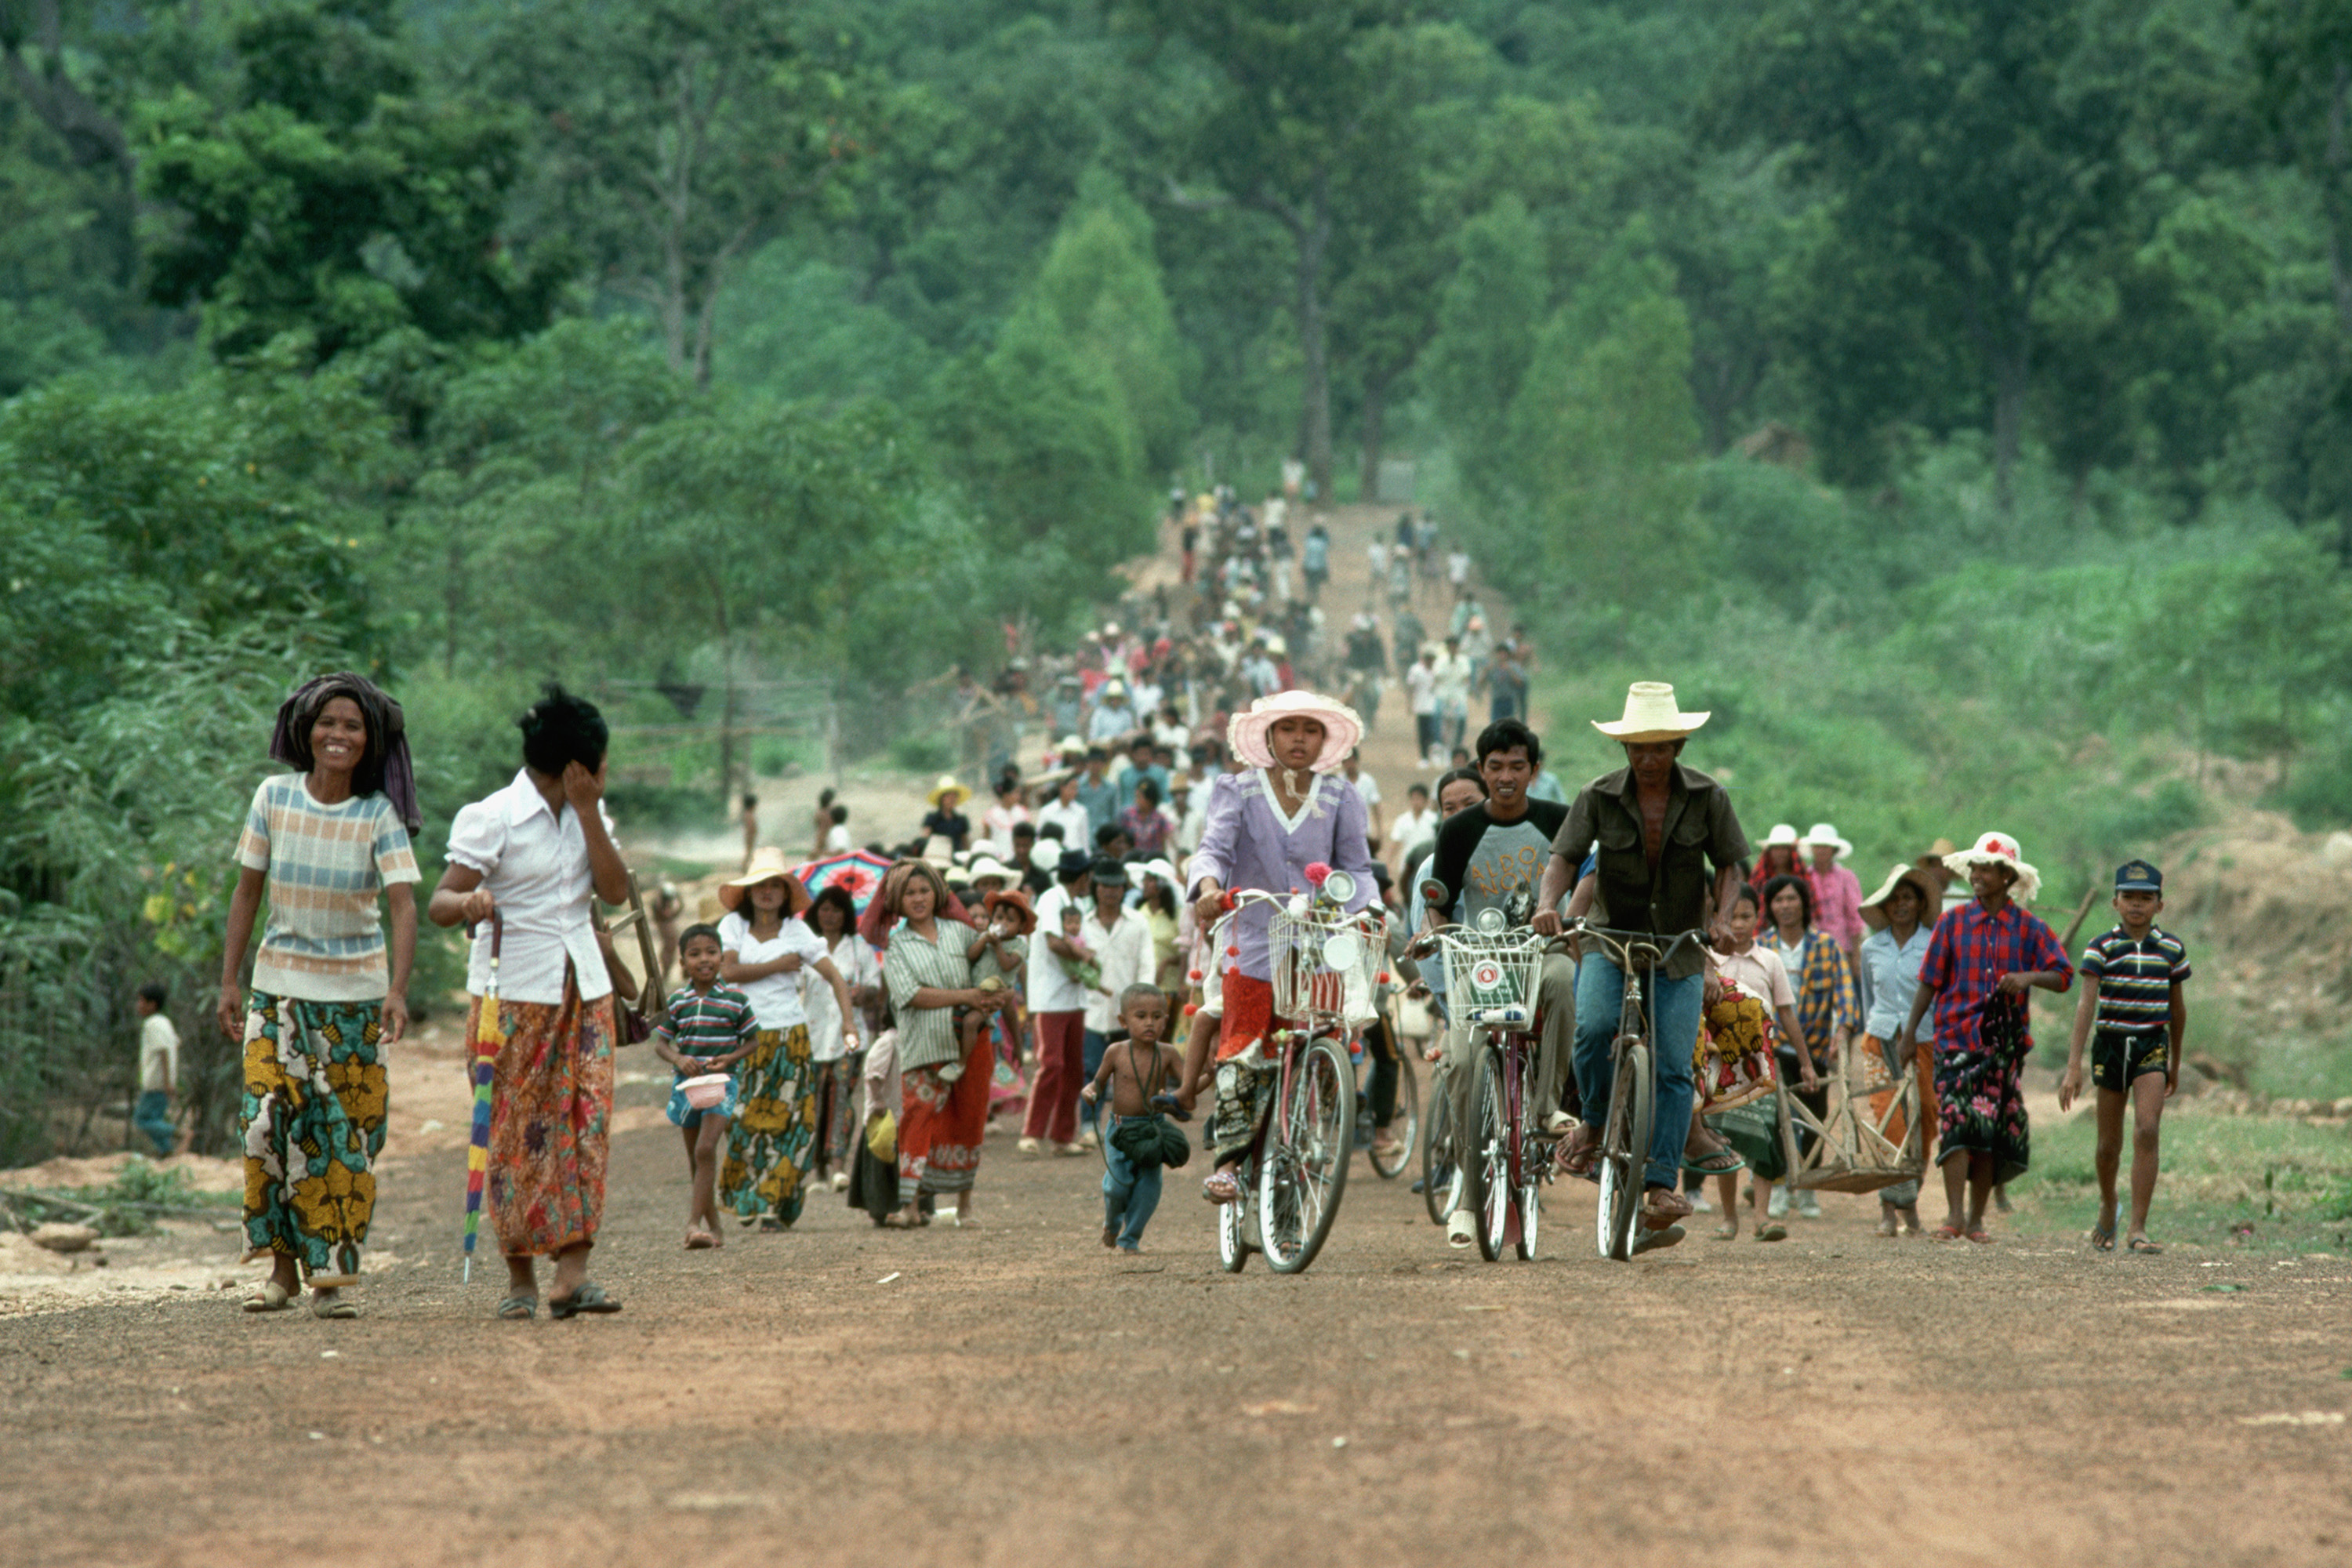 Refugees fleeing Cambodia in 1989. The Khmer Rouge genocide and Vietnamese occupation from 1979 to 1989 forced many Cambodians to flee to neighboring countries.(Peter Turnley/Corbis/VCG via Getty Images)